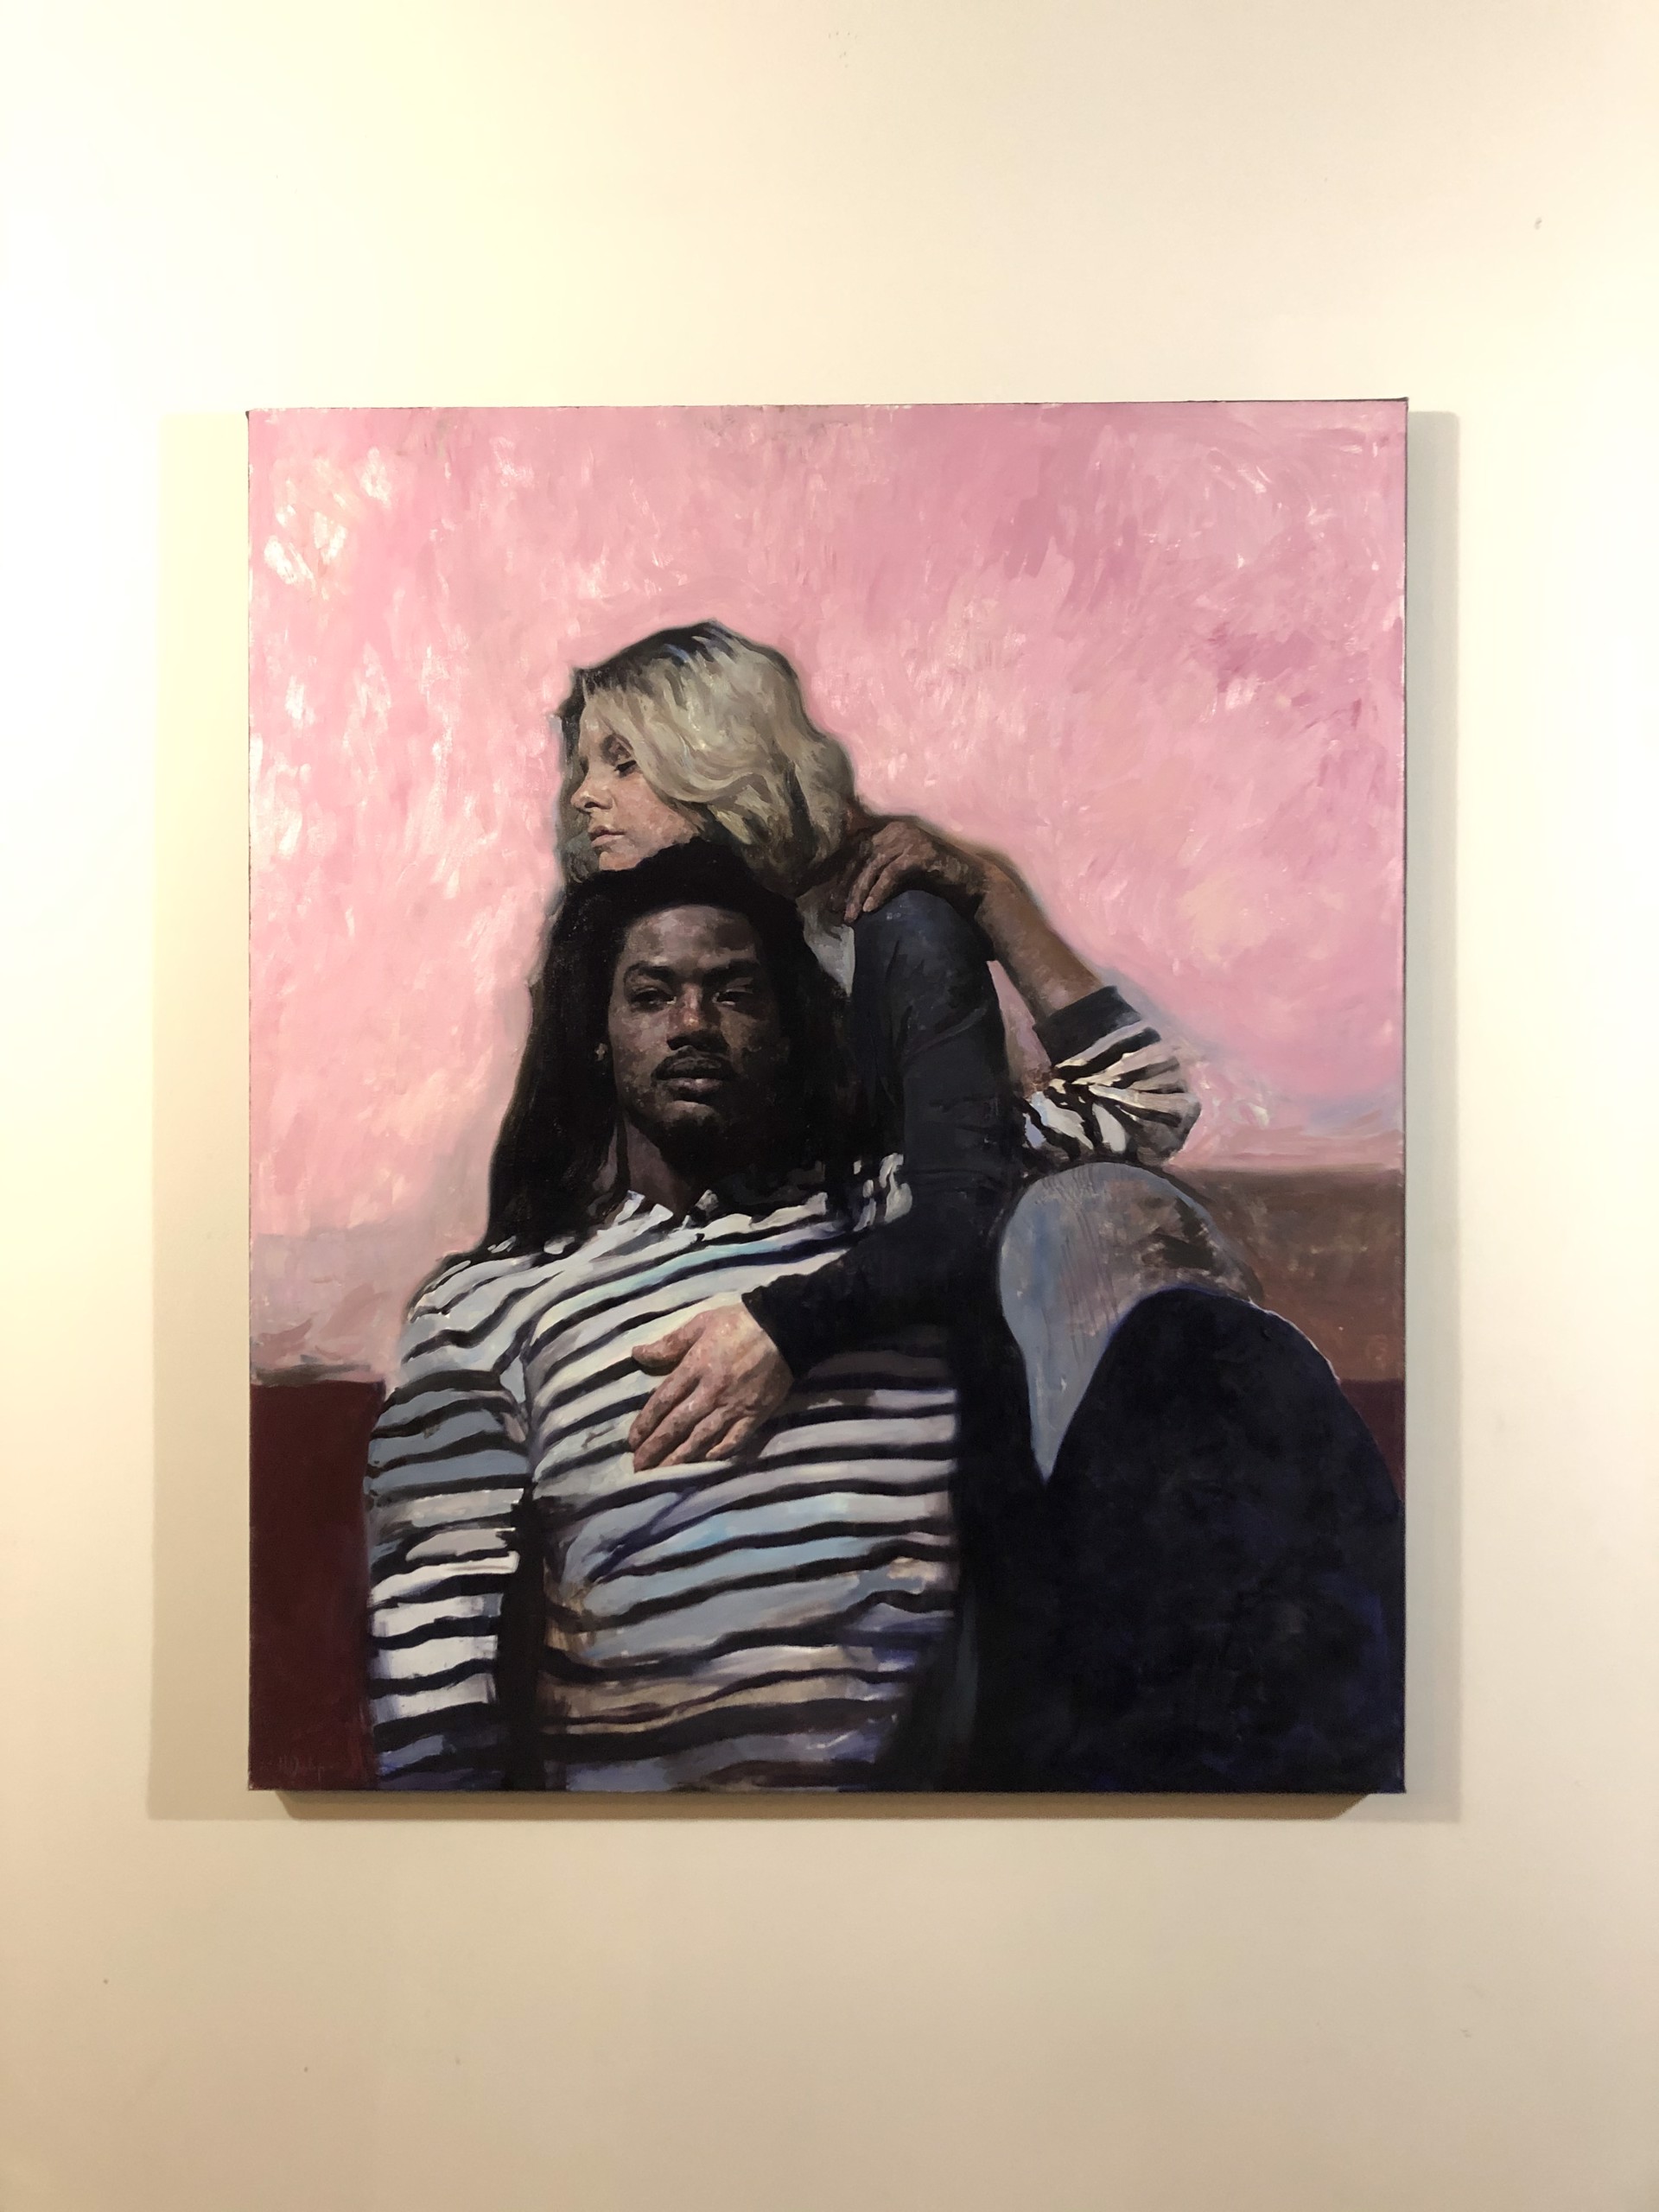 Susan and Quan in the Pink Room by Hollis Dunlap